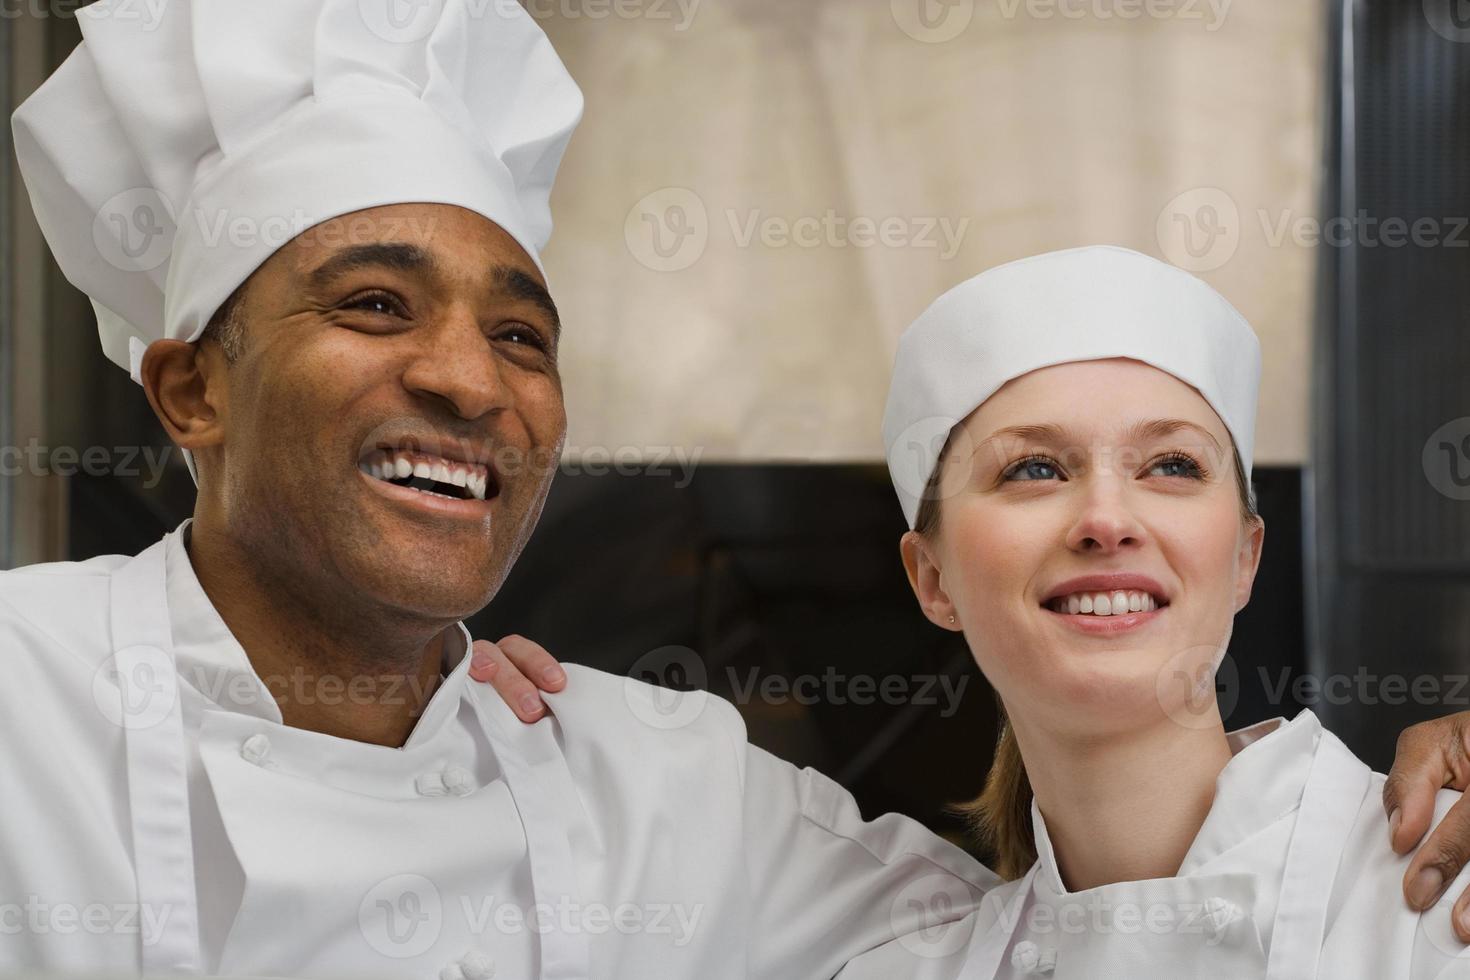 Chefs smiling photo